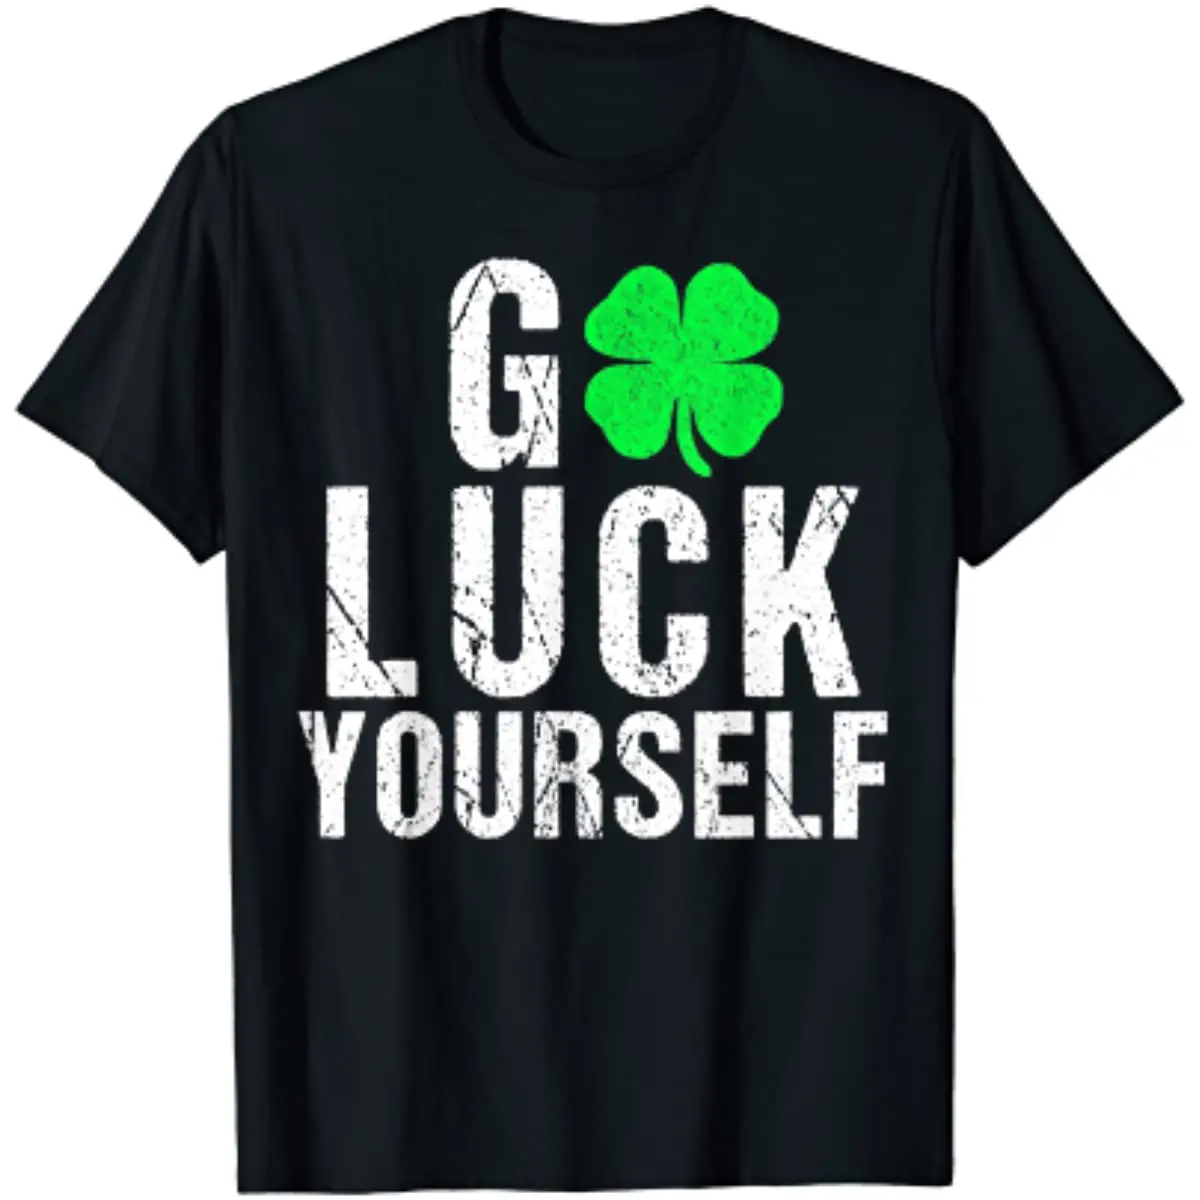 

Funny Saint Patrick's Day T-Shirt for Adults Men Women T-Shirt Good Luck Yourself Cotton Four Seasons Daily Tees